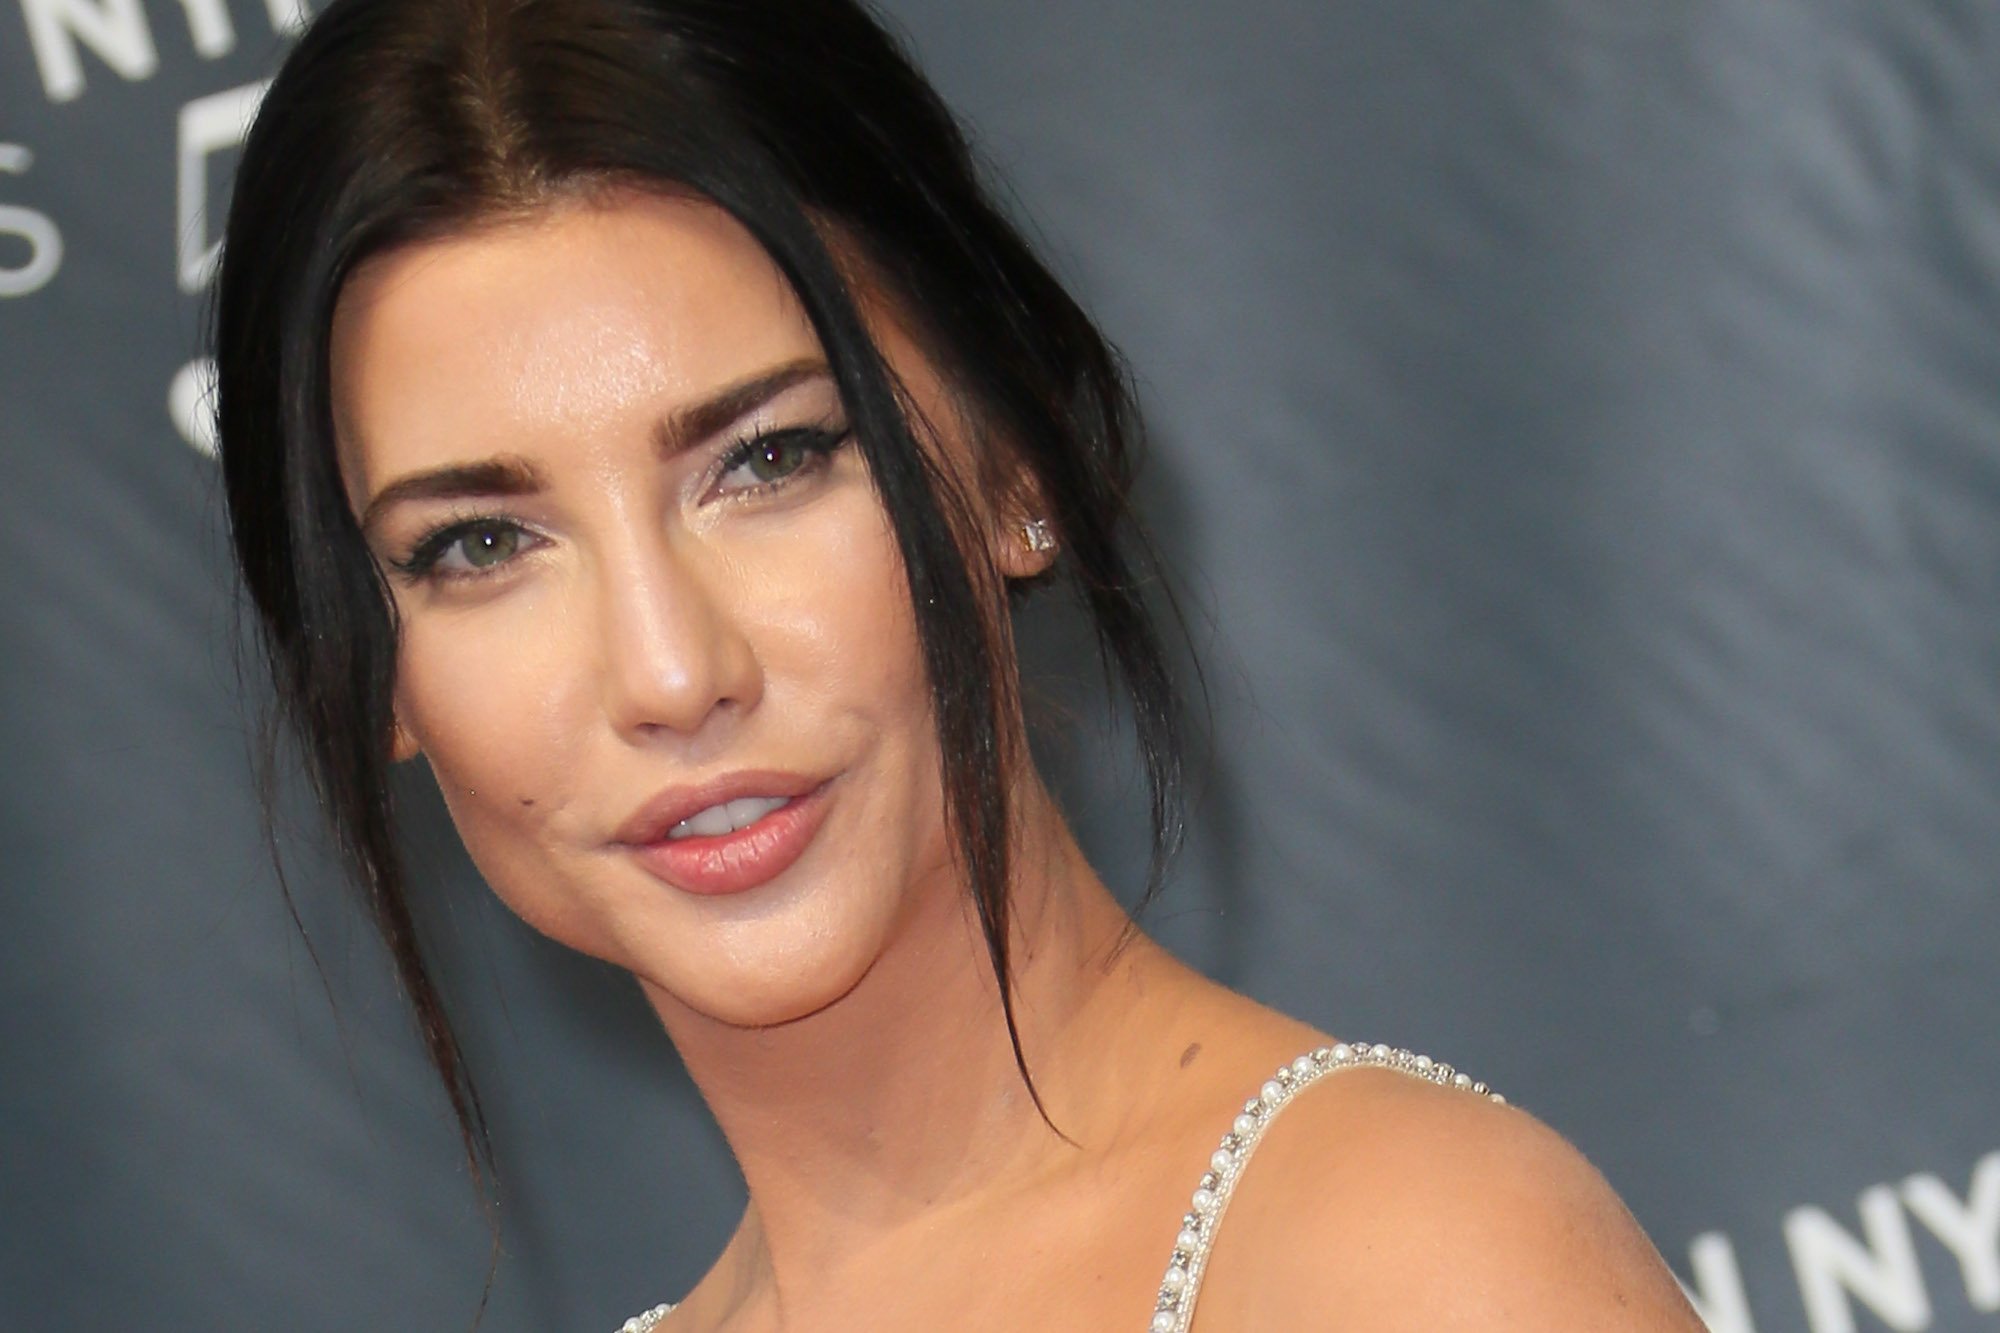 ‘The Bold and the Beautiful’: Will Finn Propose to Steffy?